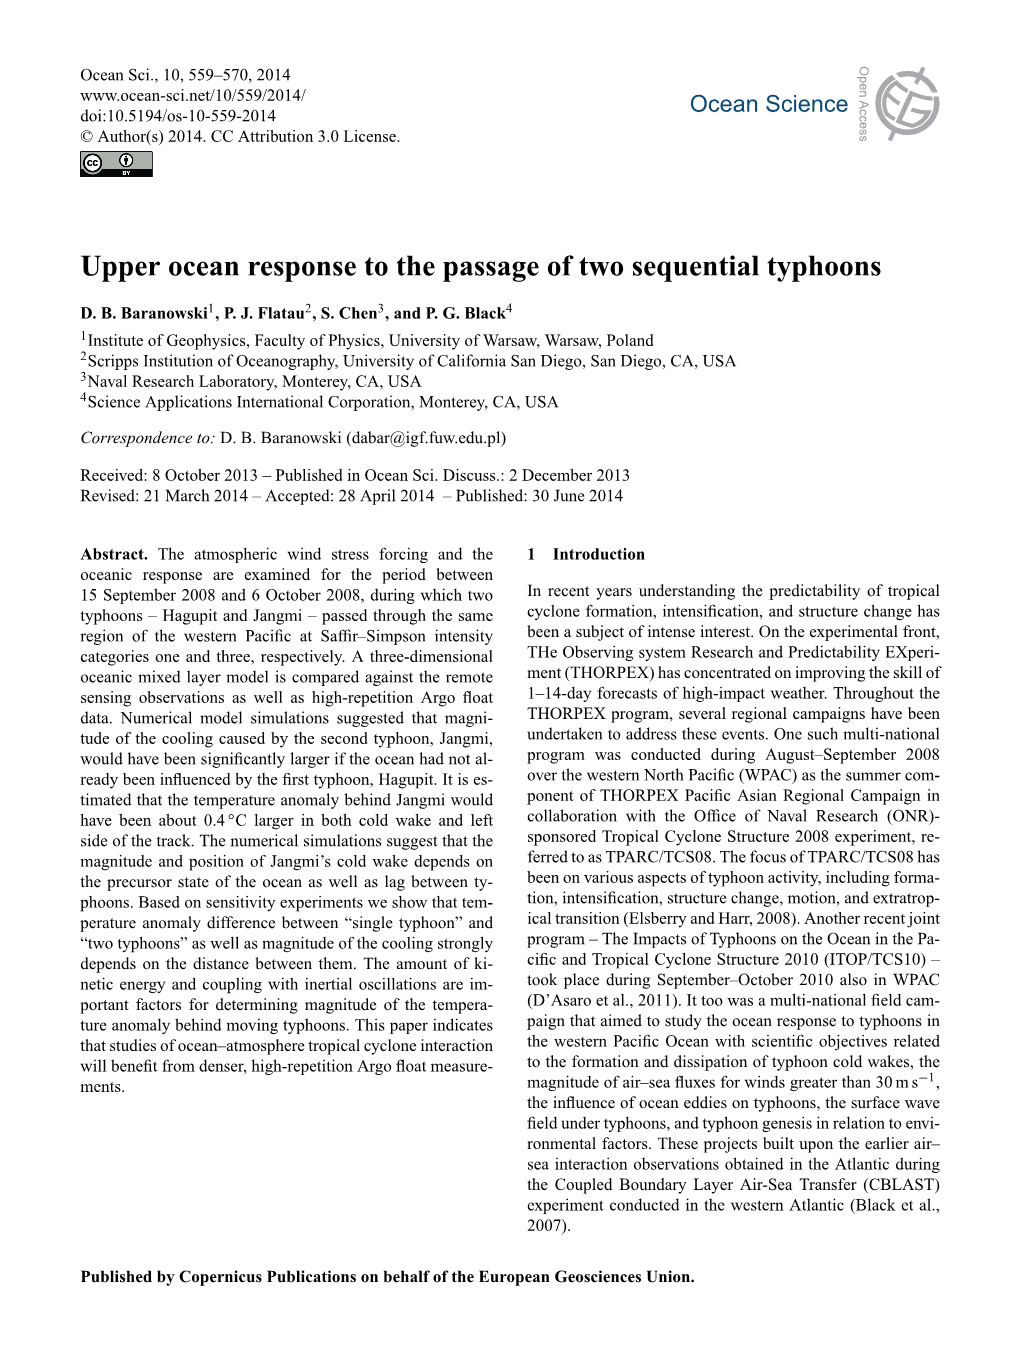 Upper Ocean Response to the Passage of Two Sequential Typhoons